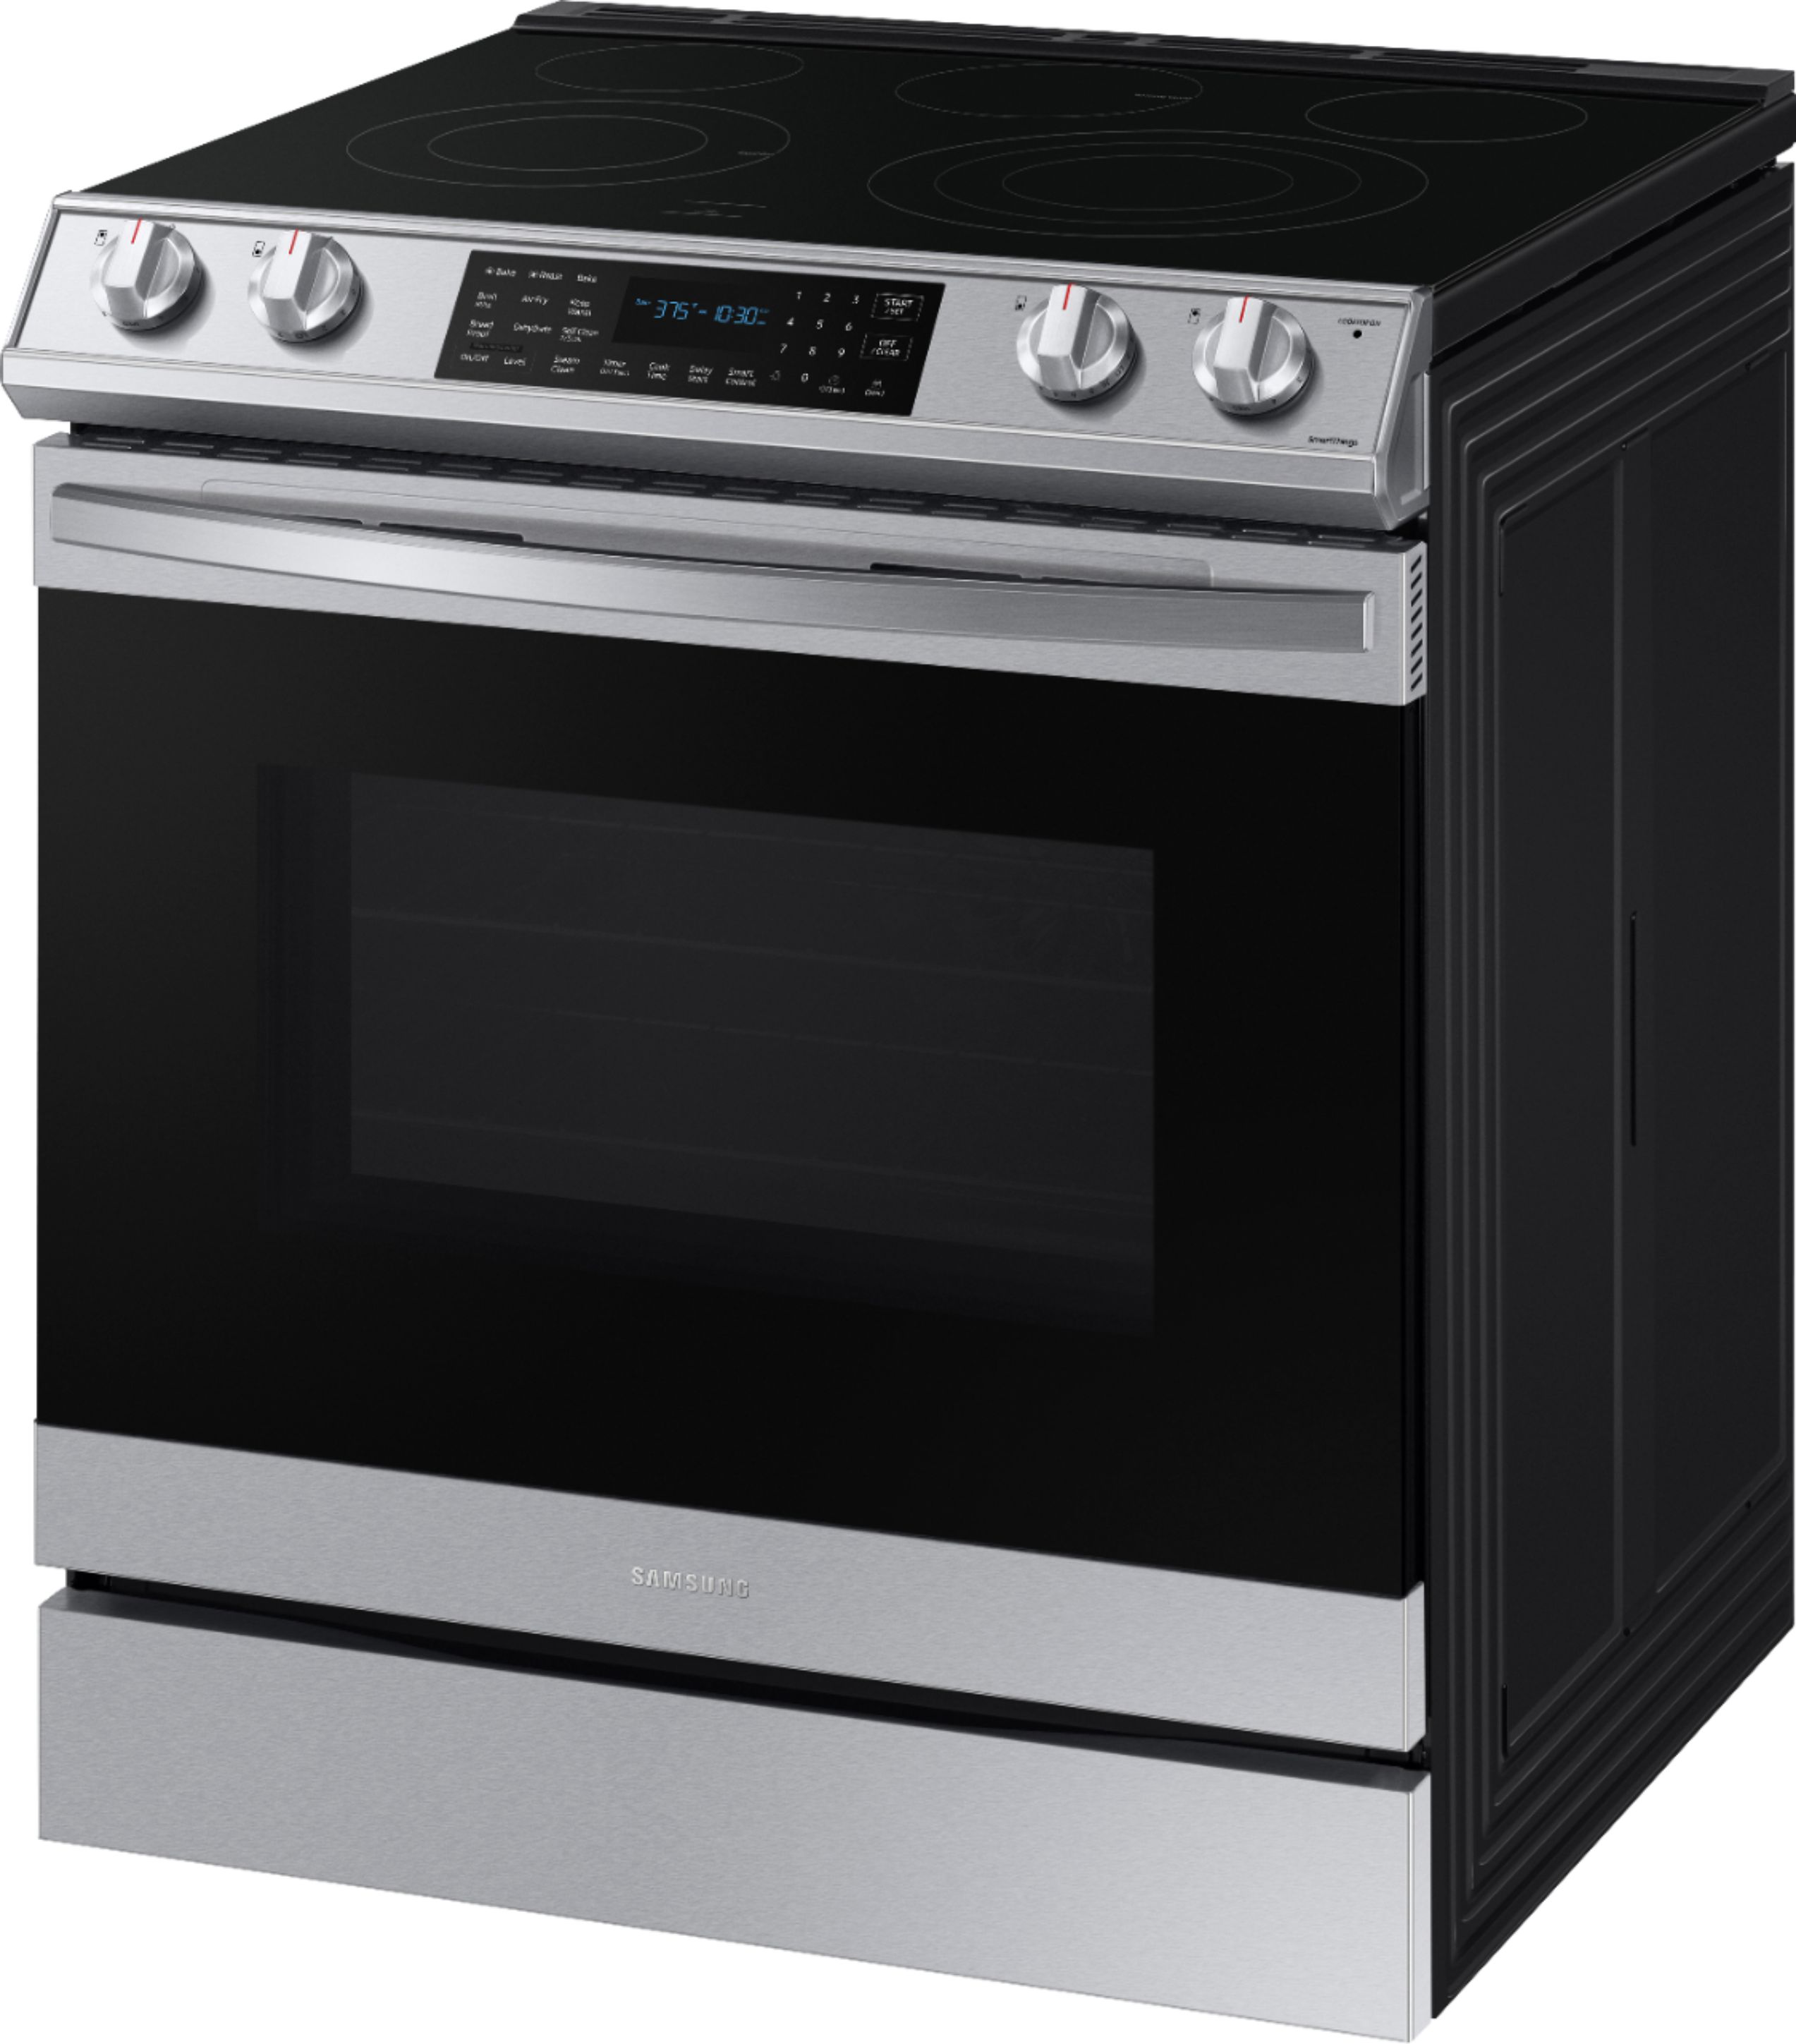 Left View: Samsung - 6.3 cu. ft. Freestanding Electric Range with WiFi and Steam Clean - Black